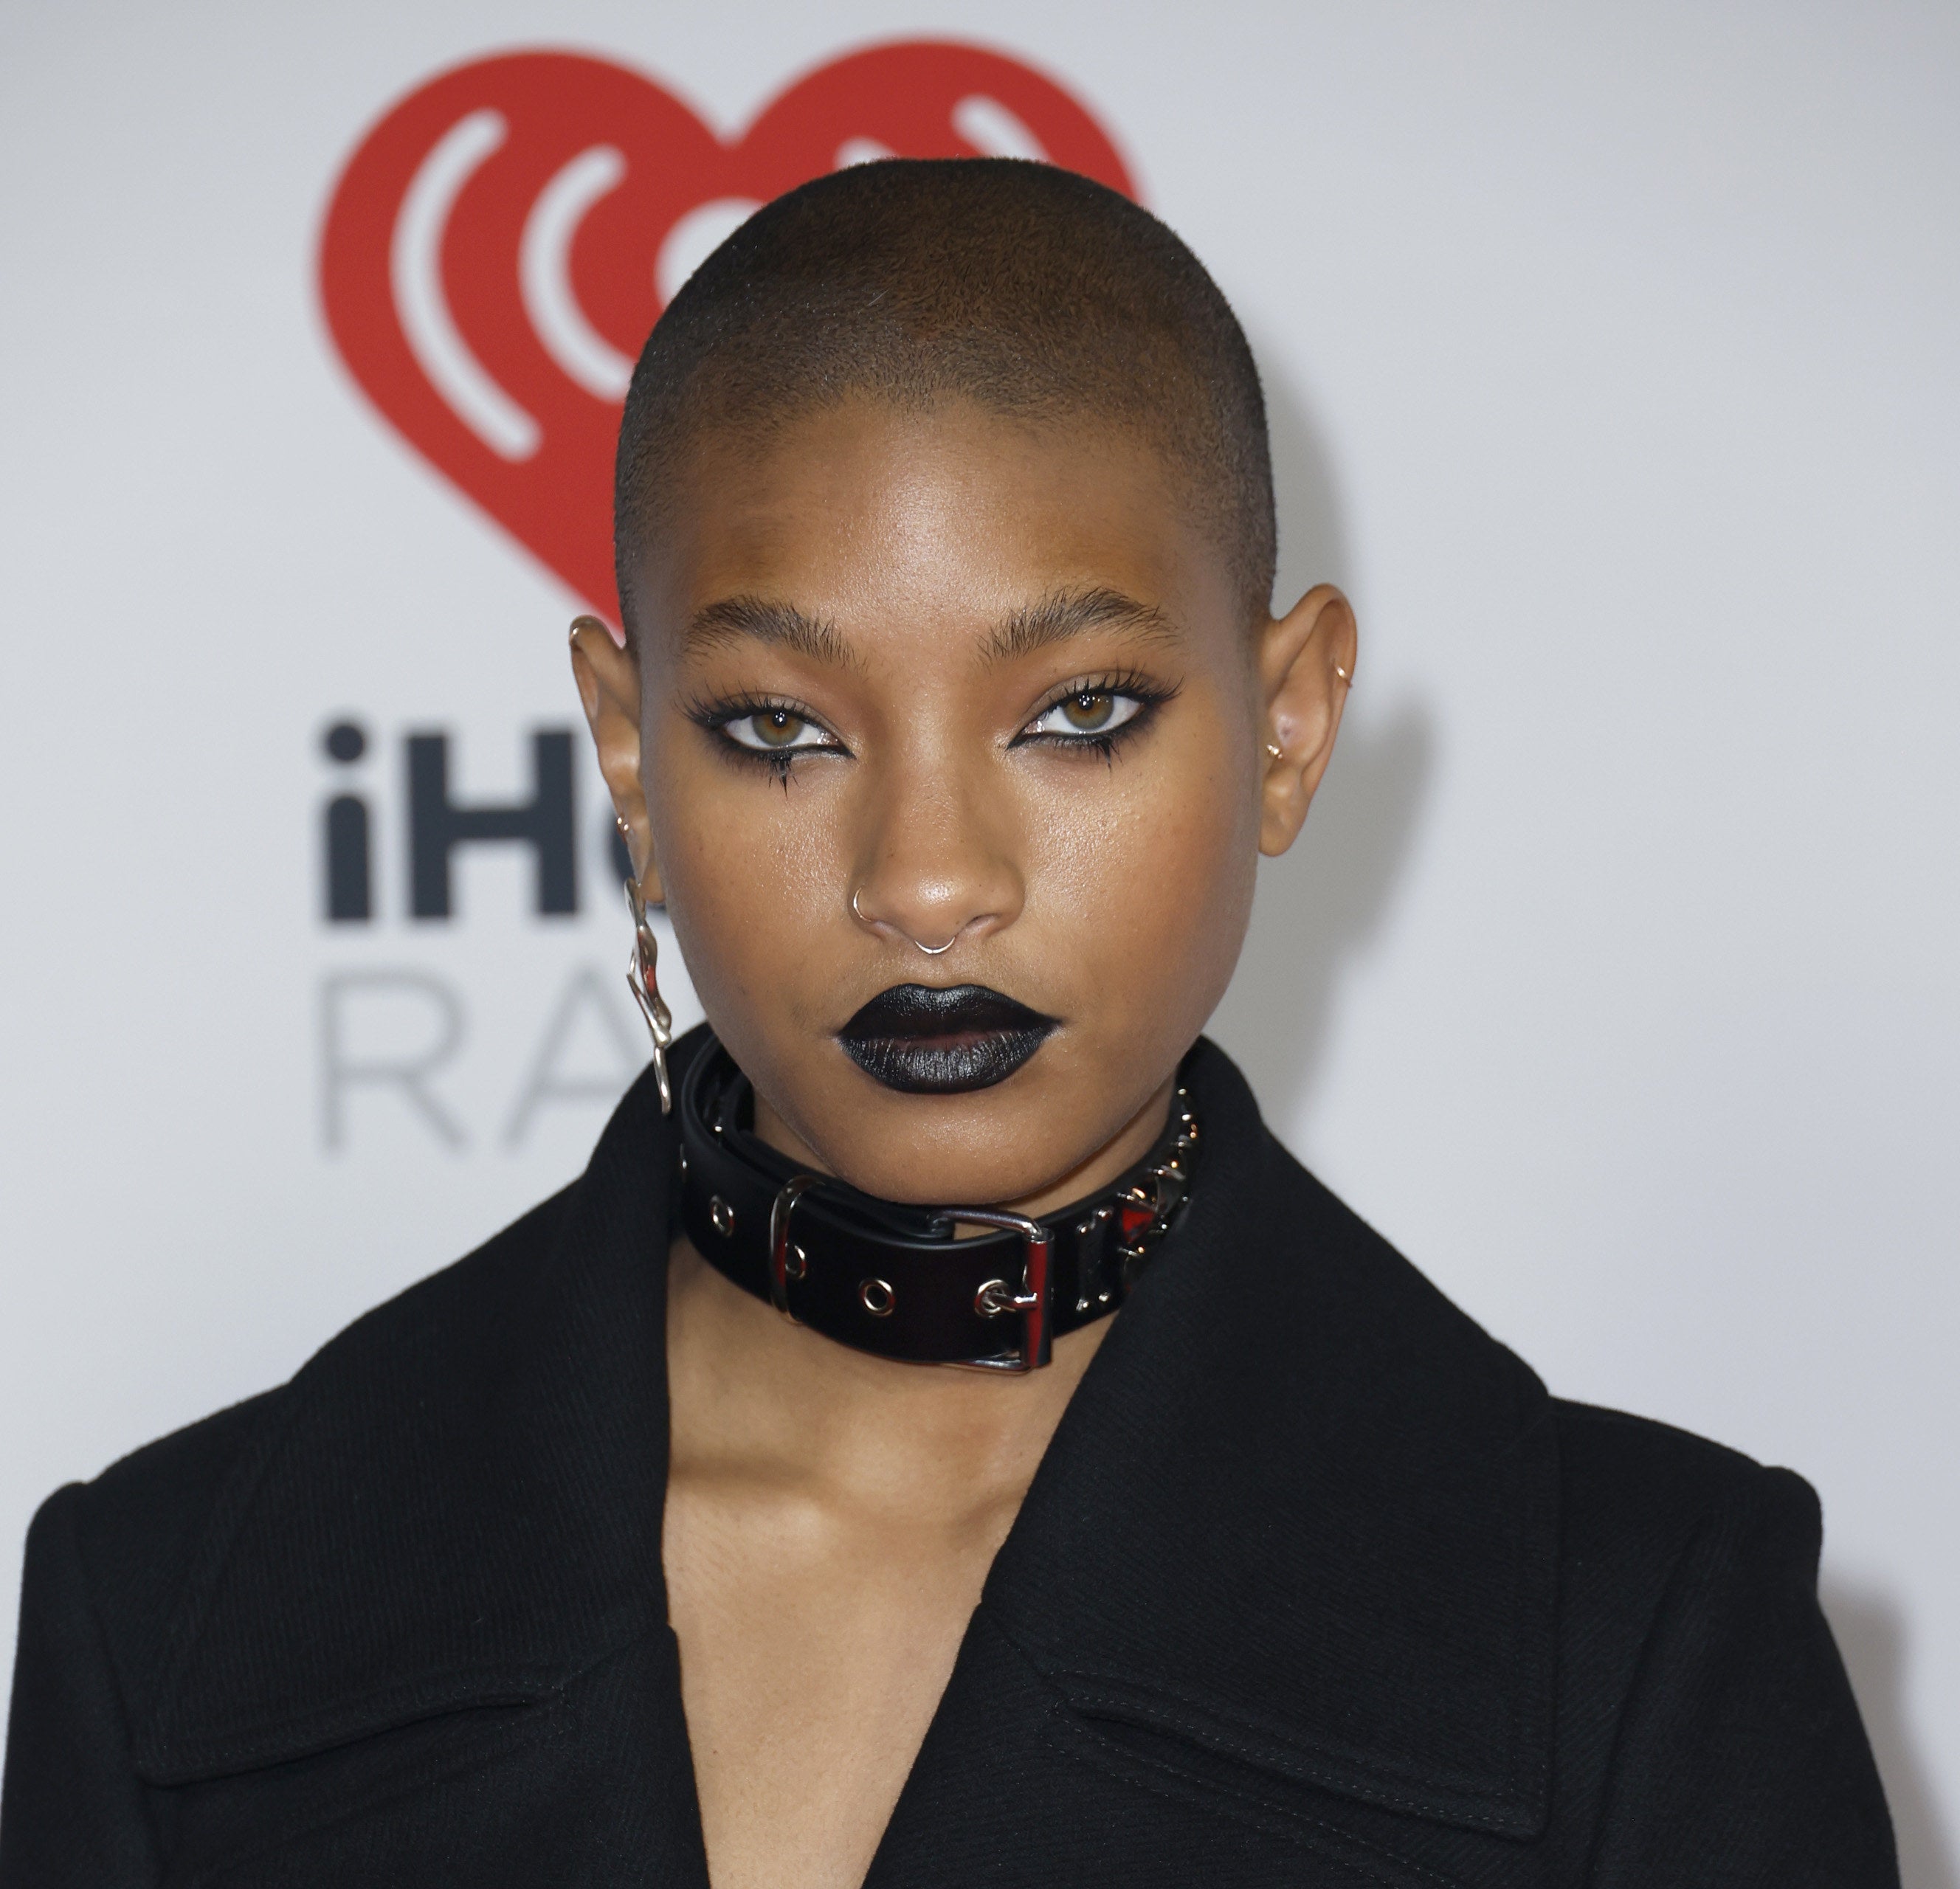 Willow Smith attends the 2022 iHeartRadio Music Awards at The Shrine Auditorium in Los Angeles